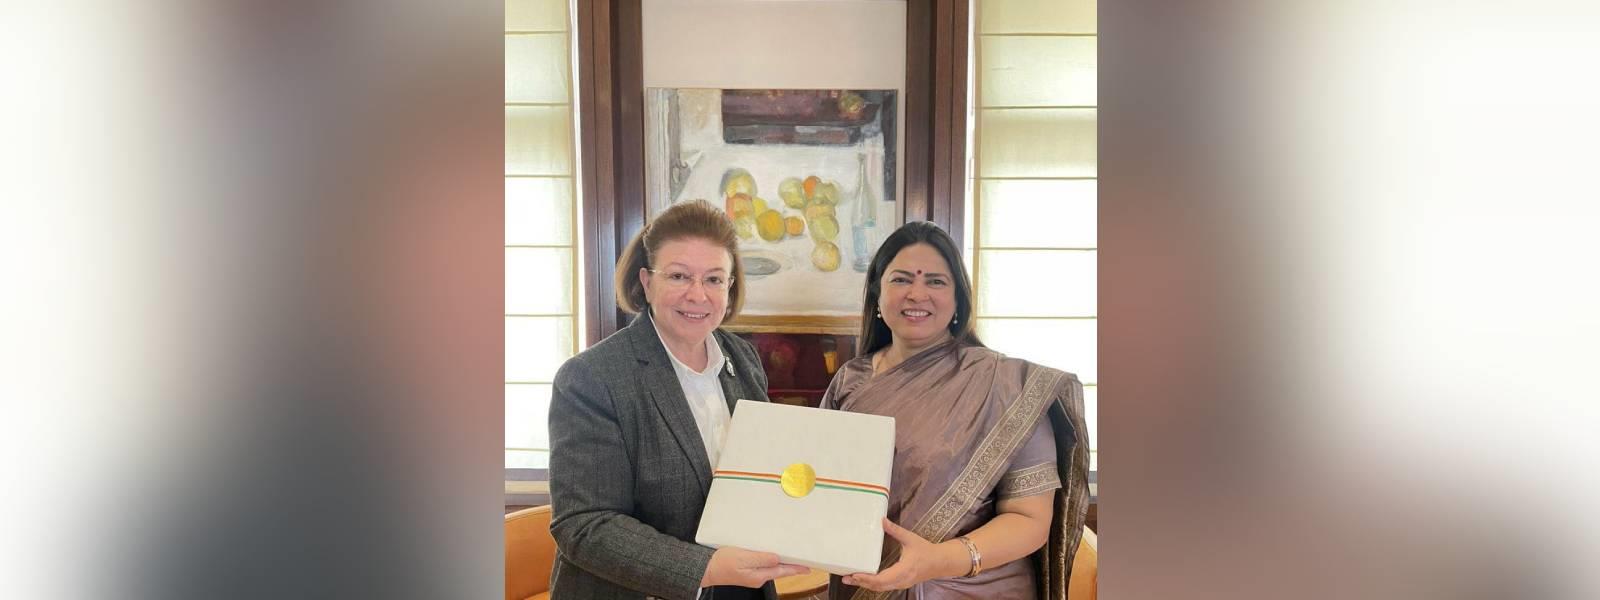 Minister of State for External Affairs, Smt. Meenakashi Lekhi met H. E. Ms. Lina G. Mendoni, Minister of Culture & Sports of Greece in Athens